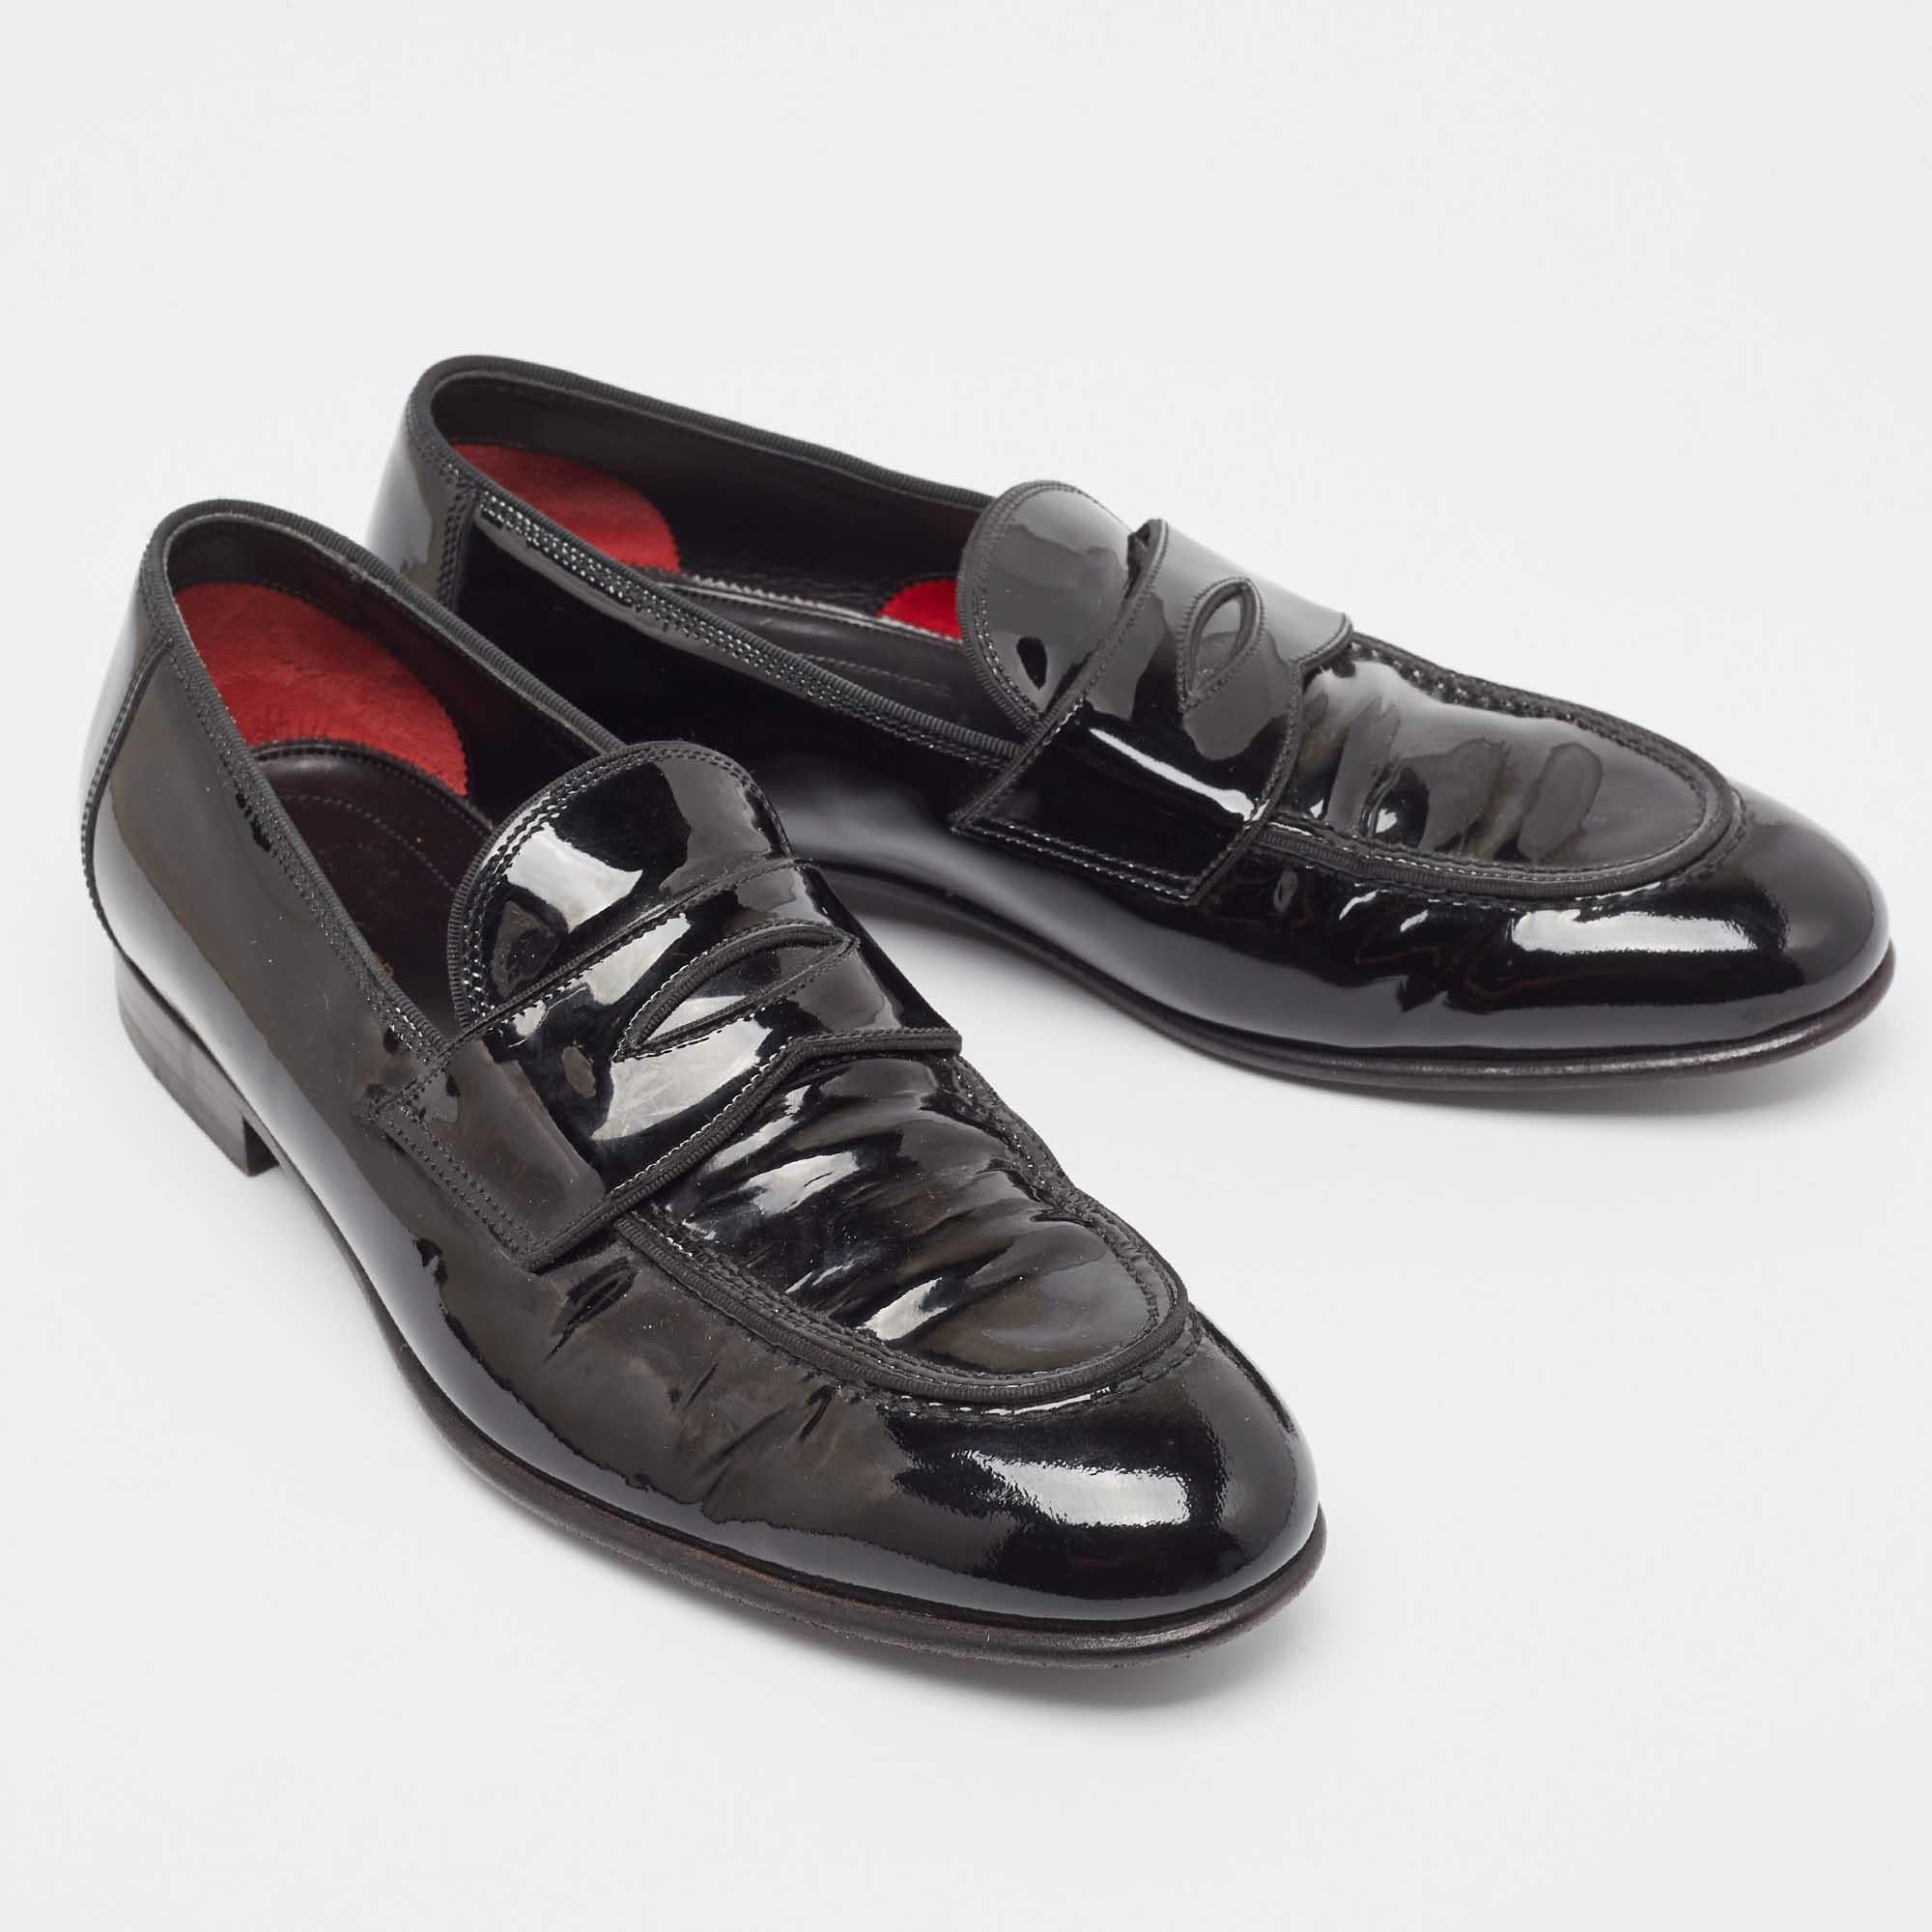 Tom Ford Black Patent Leather Penny Loafers Size 40 In Good Condition For Sale In Dubai, Al Qouz 2